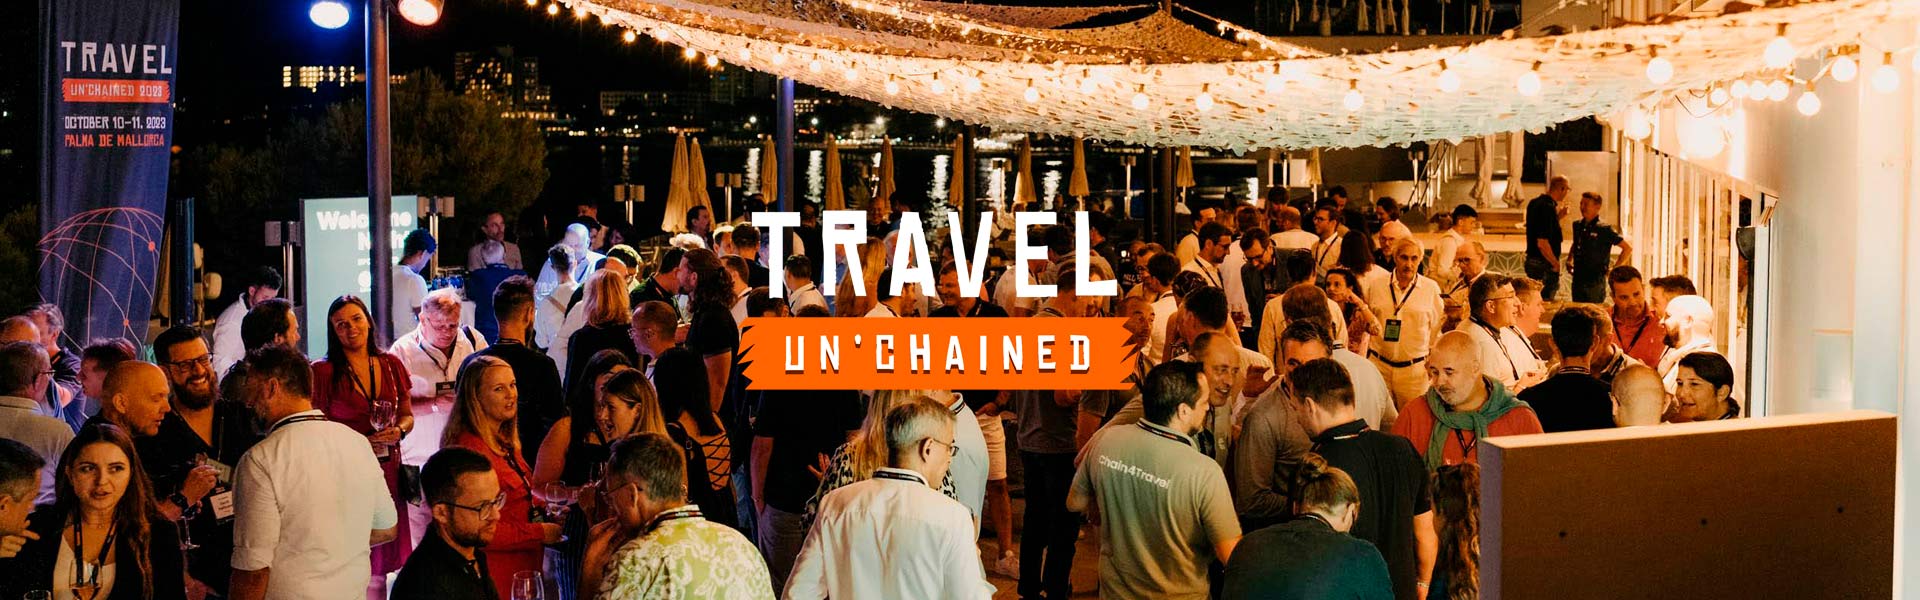 Travel Un'chained